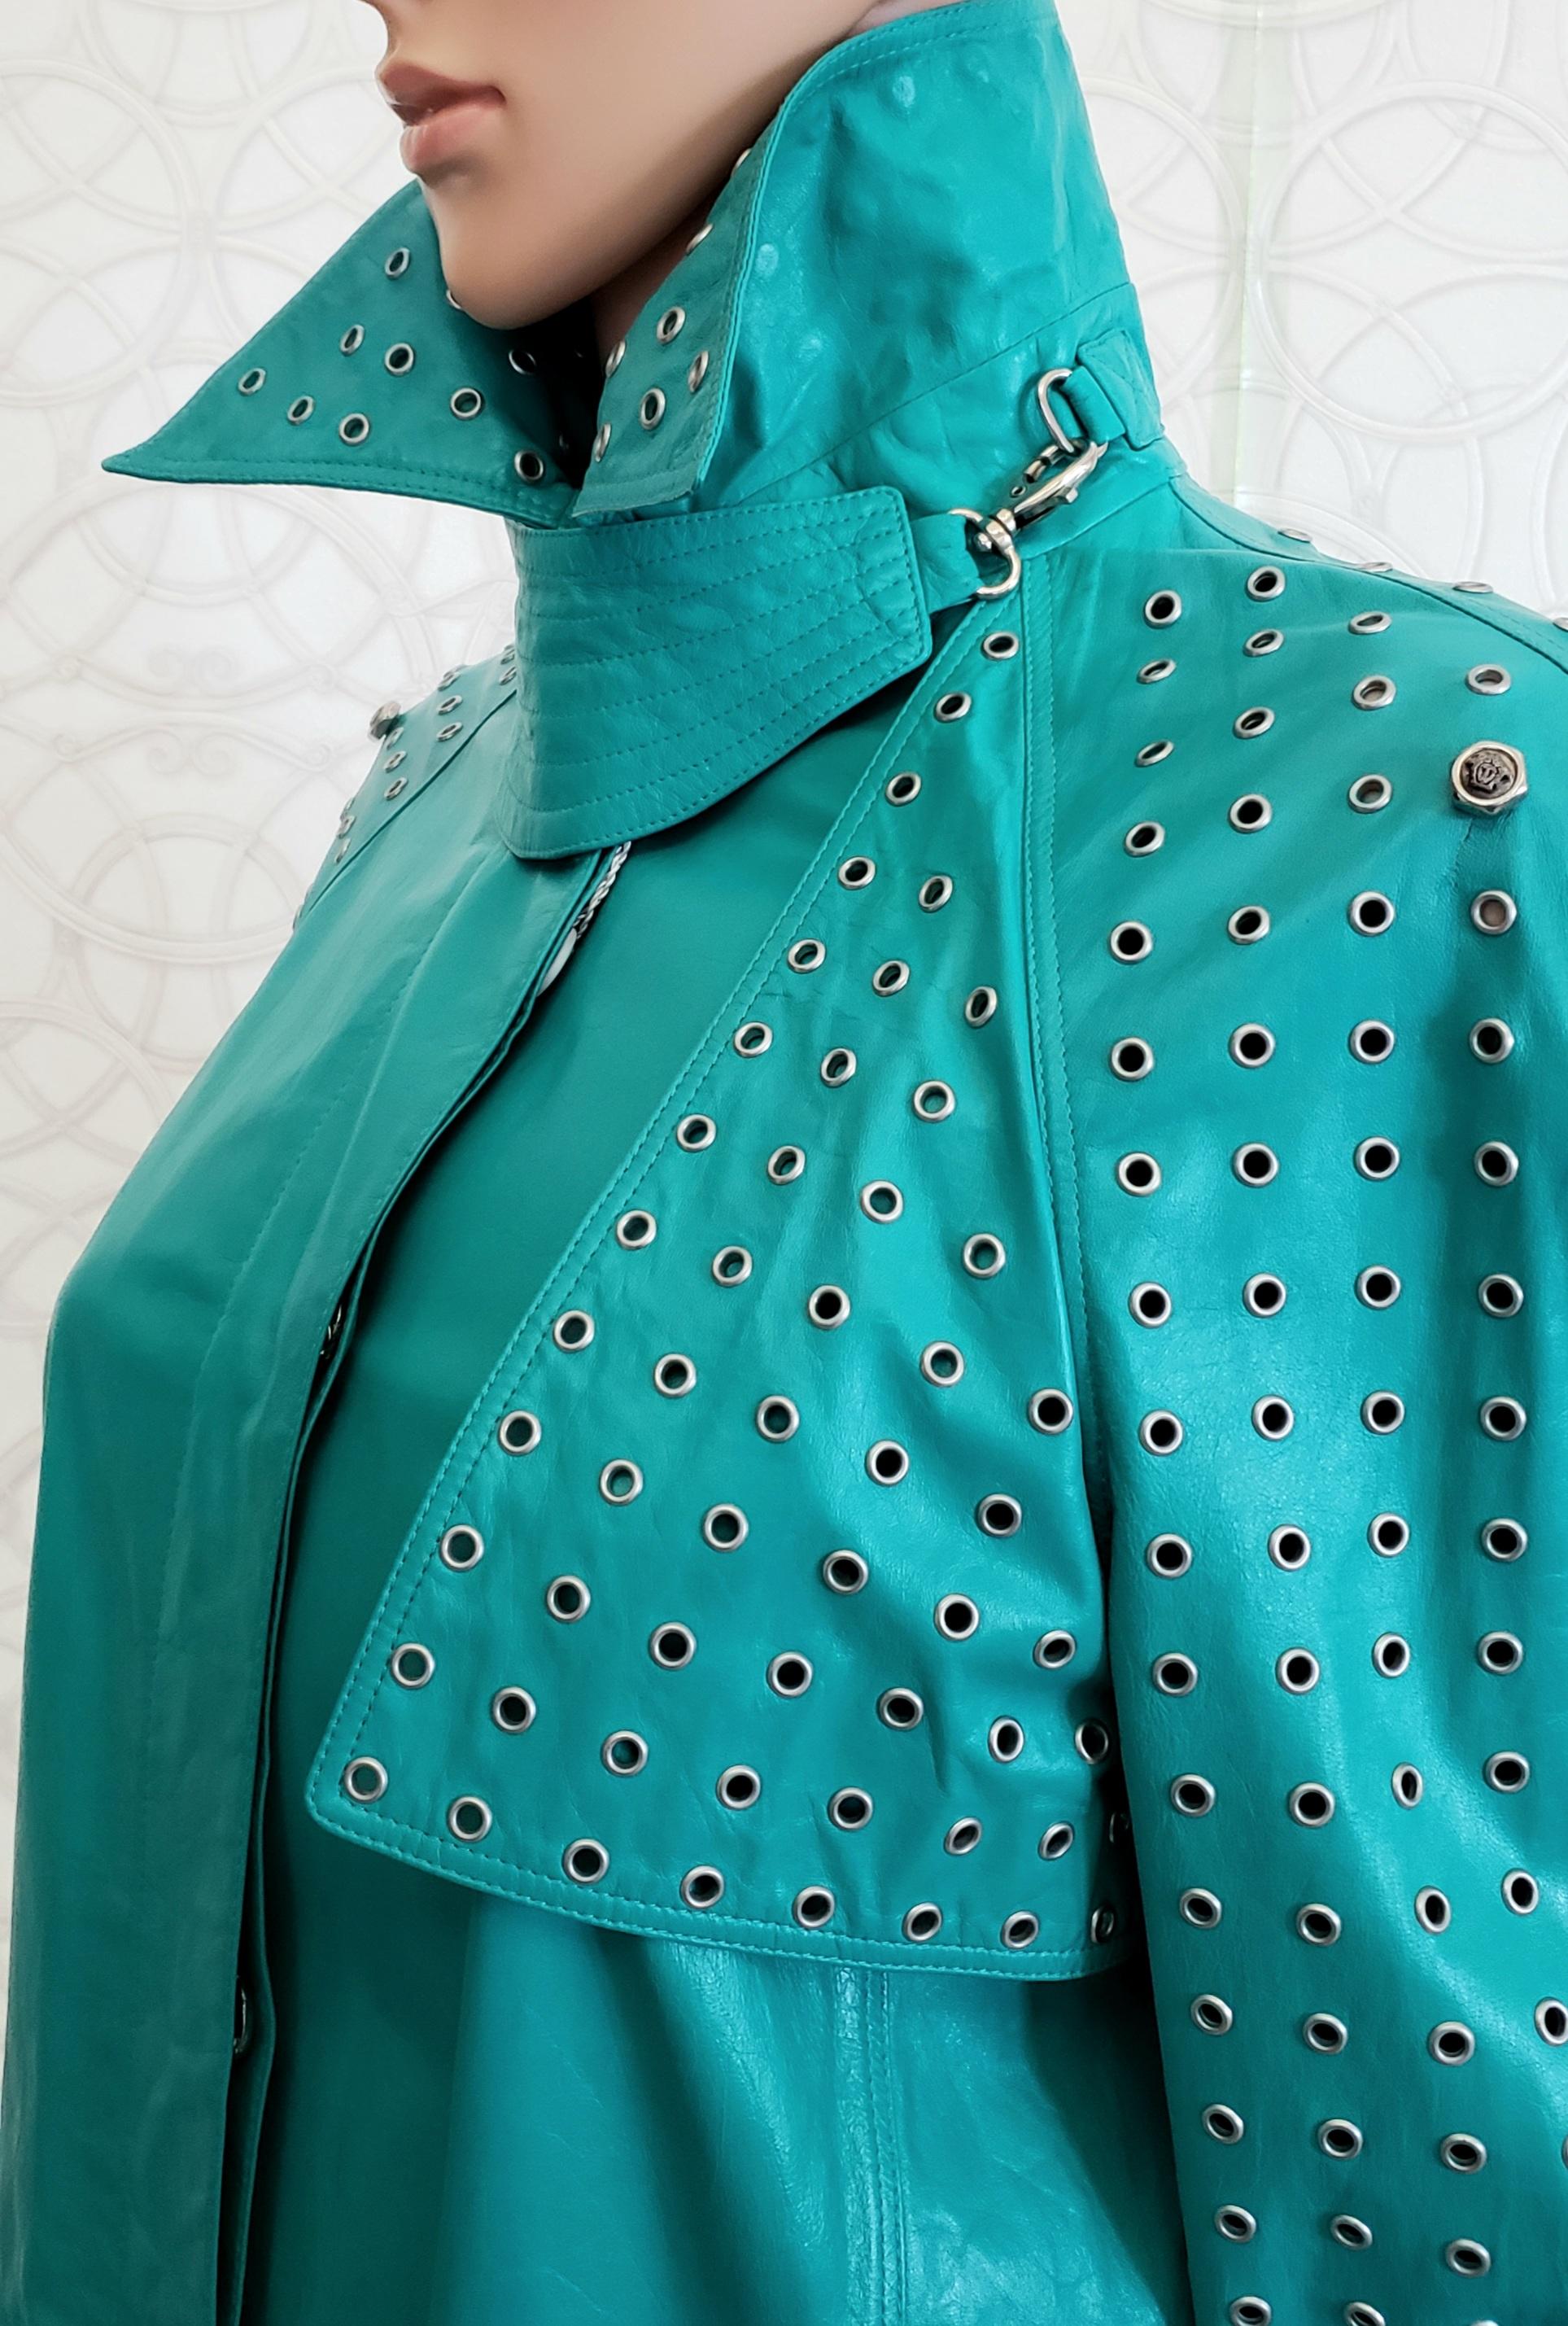 NEW GIANNI VERSACE EMERALD GREEN LEATHER JACKET with RIVETS Sz IT 40 - US 4/6 For Sale 7